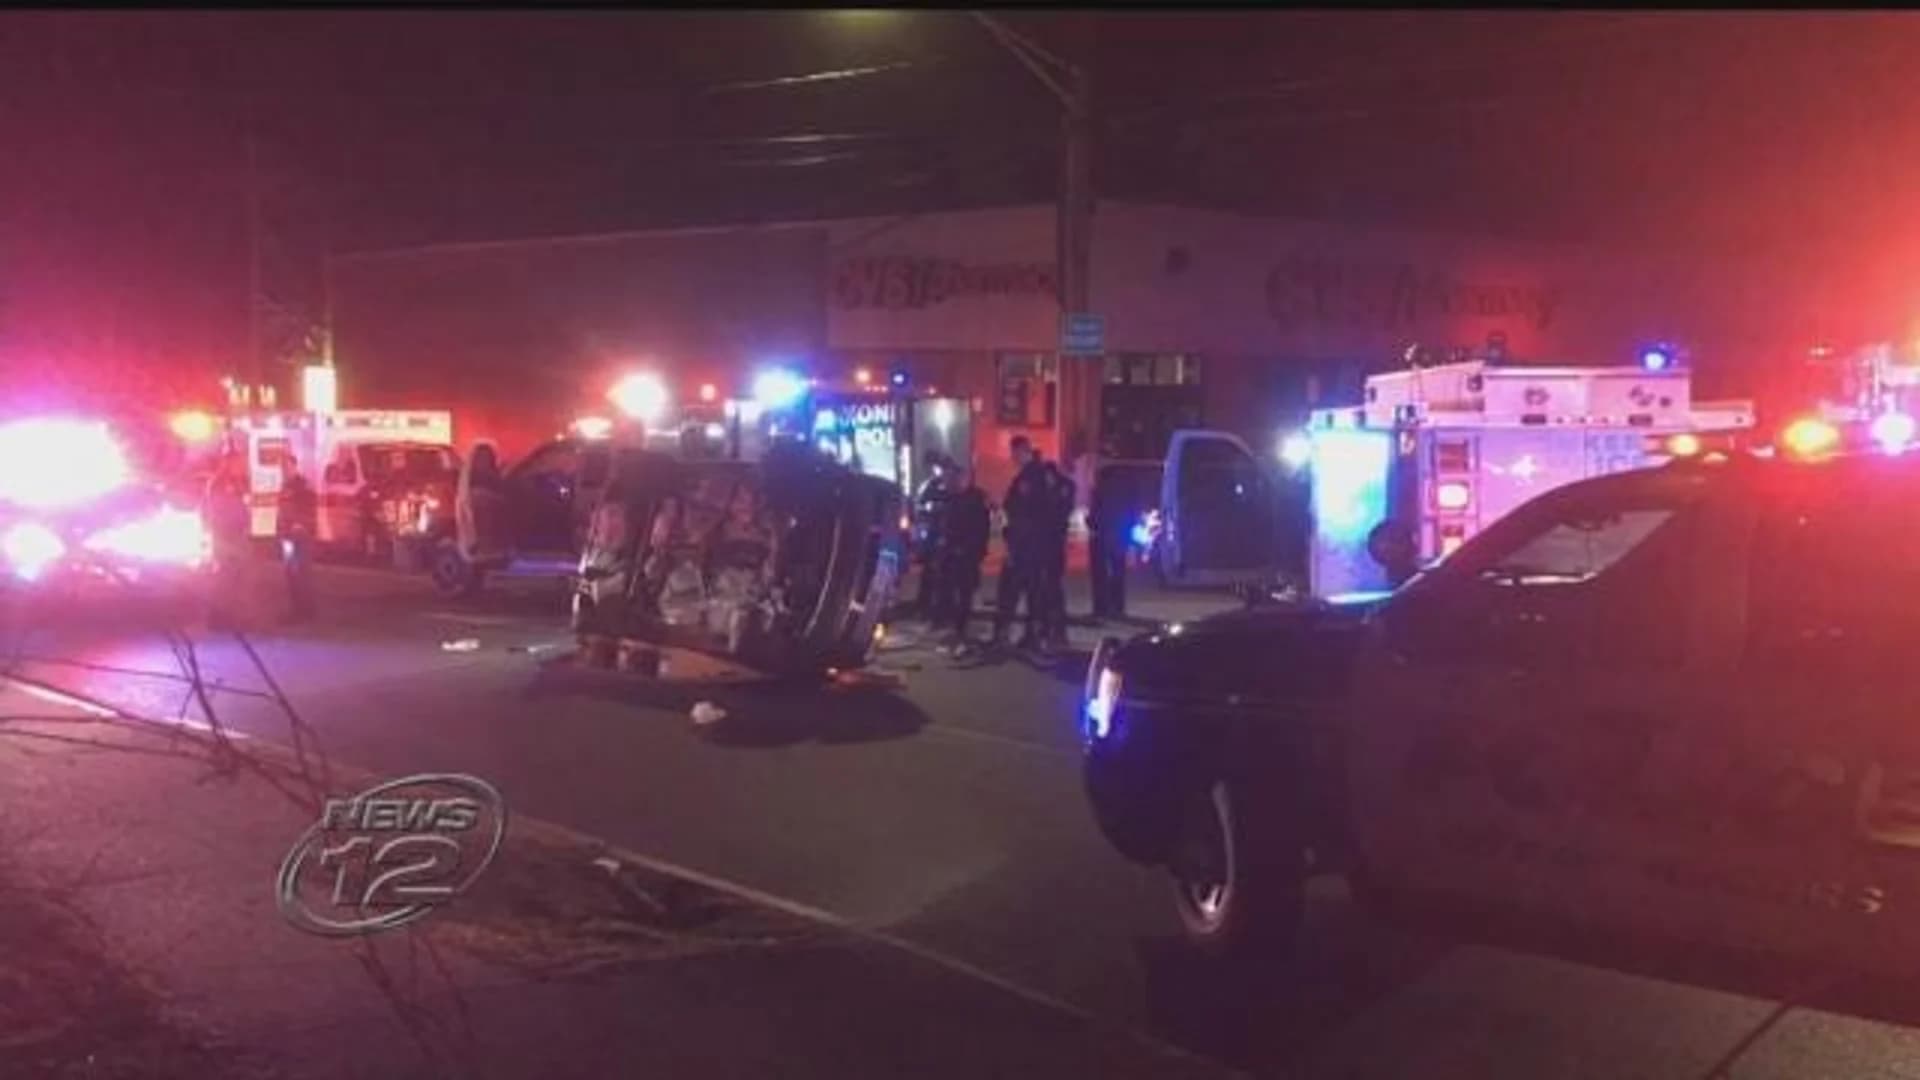 First responders rescue people trapped in car crash